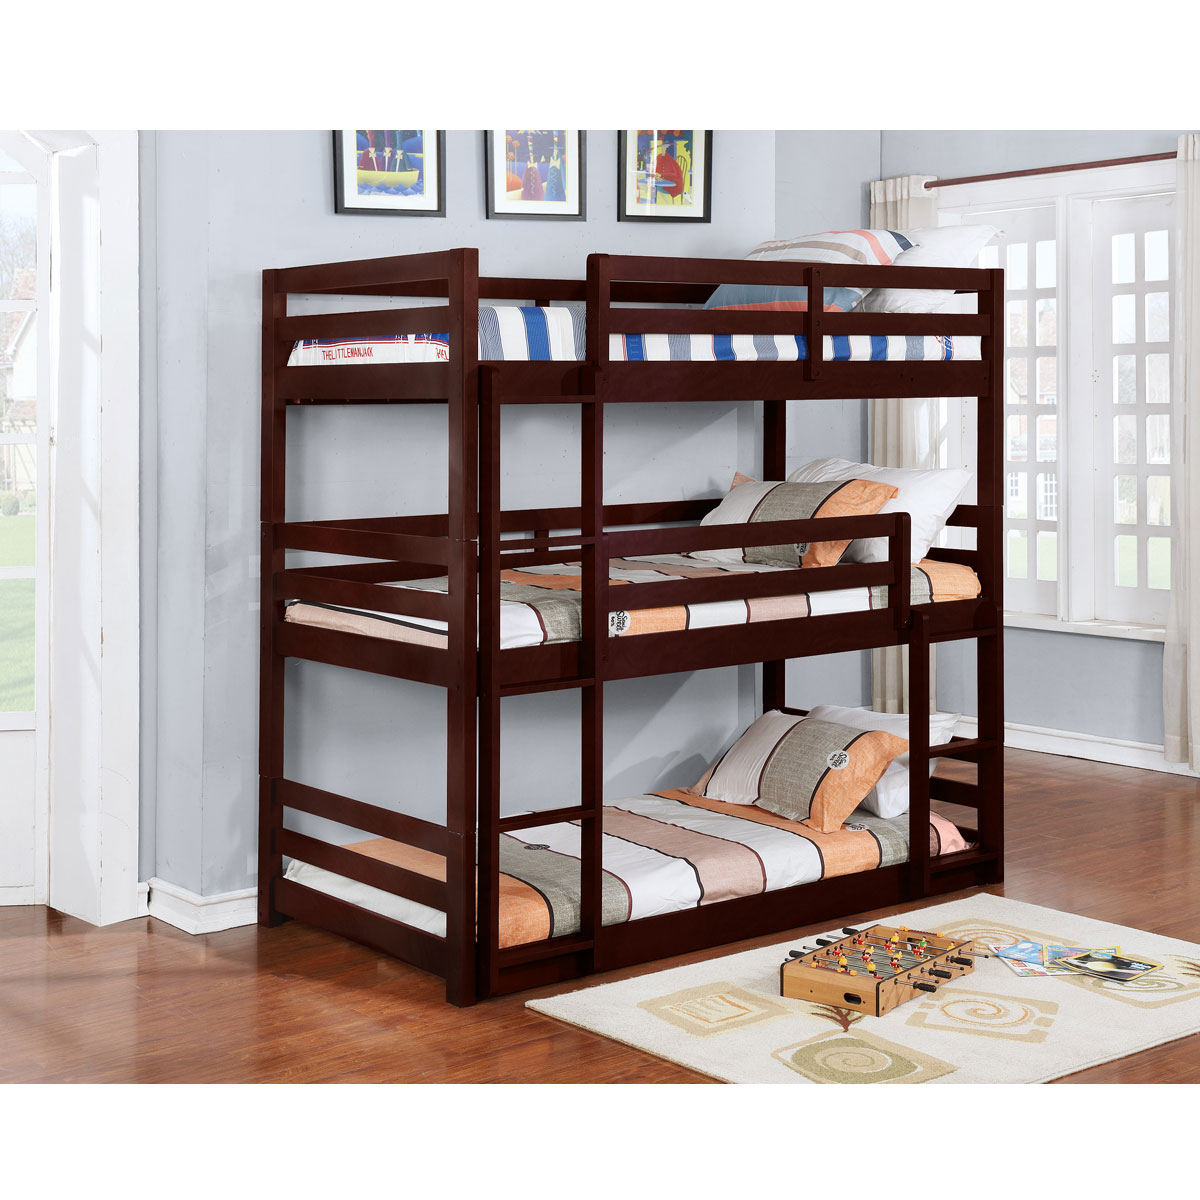 Bunkbeds Cook Brothers, Kids Bunk Beds Chicago